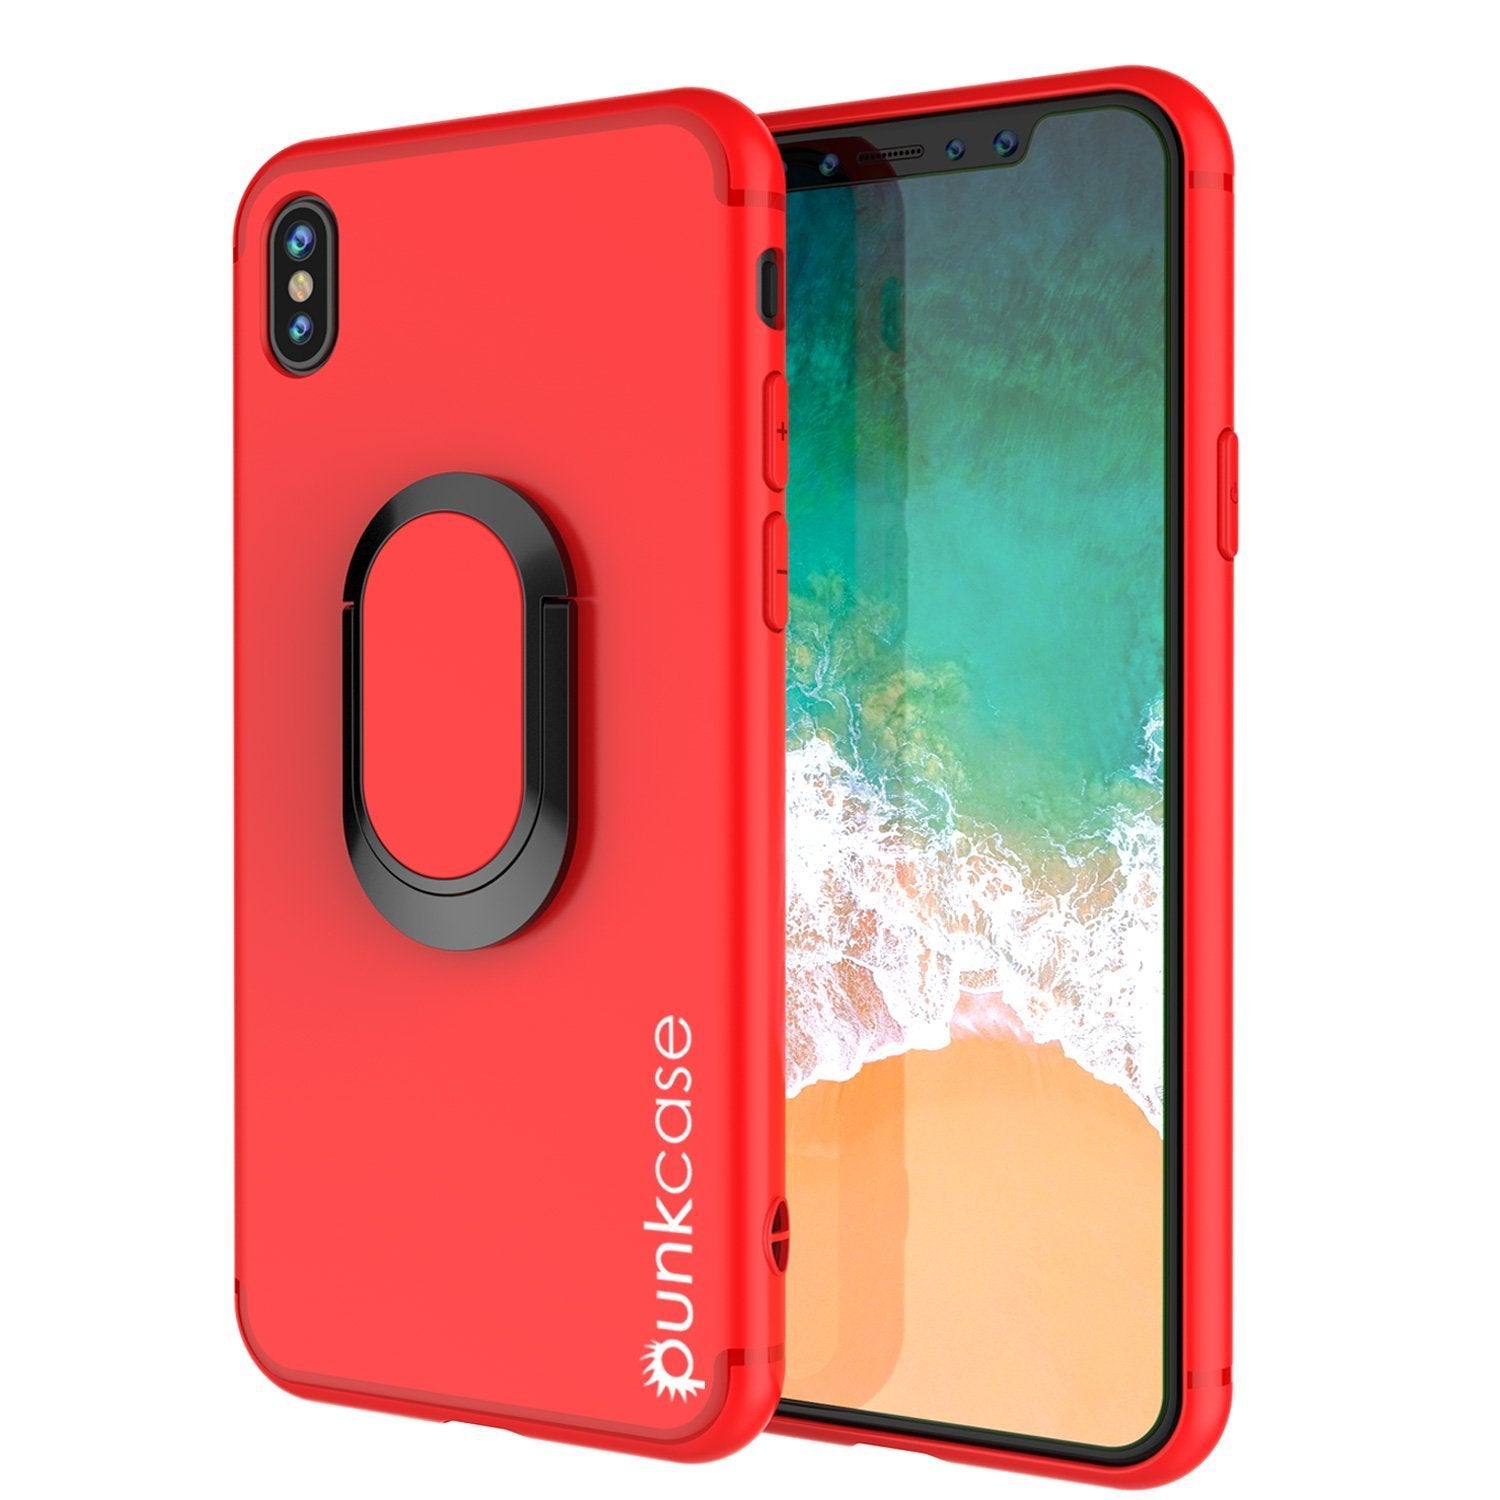 iPhone X Case, Punkcase Magnetix Protective TPU Cover W/ Kickstand, Tempered Glass Screen Protector [Red]